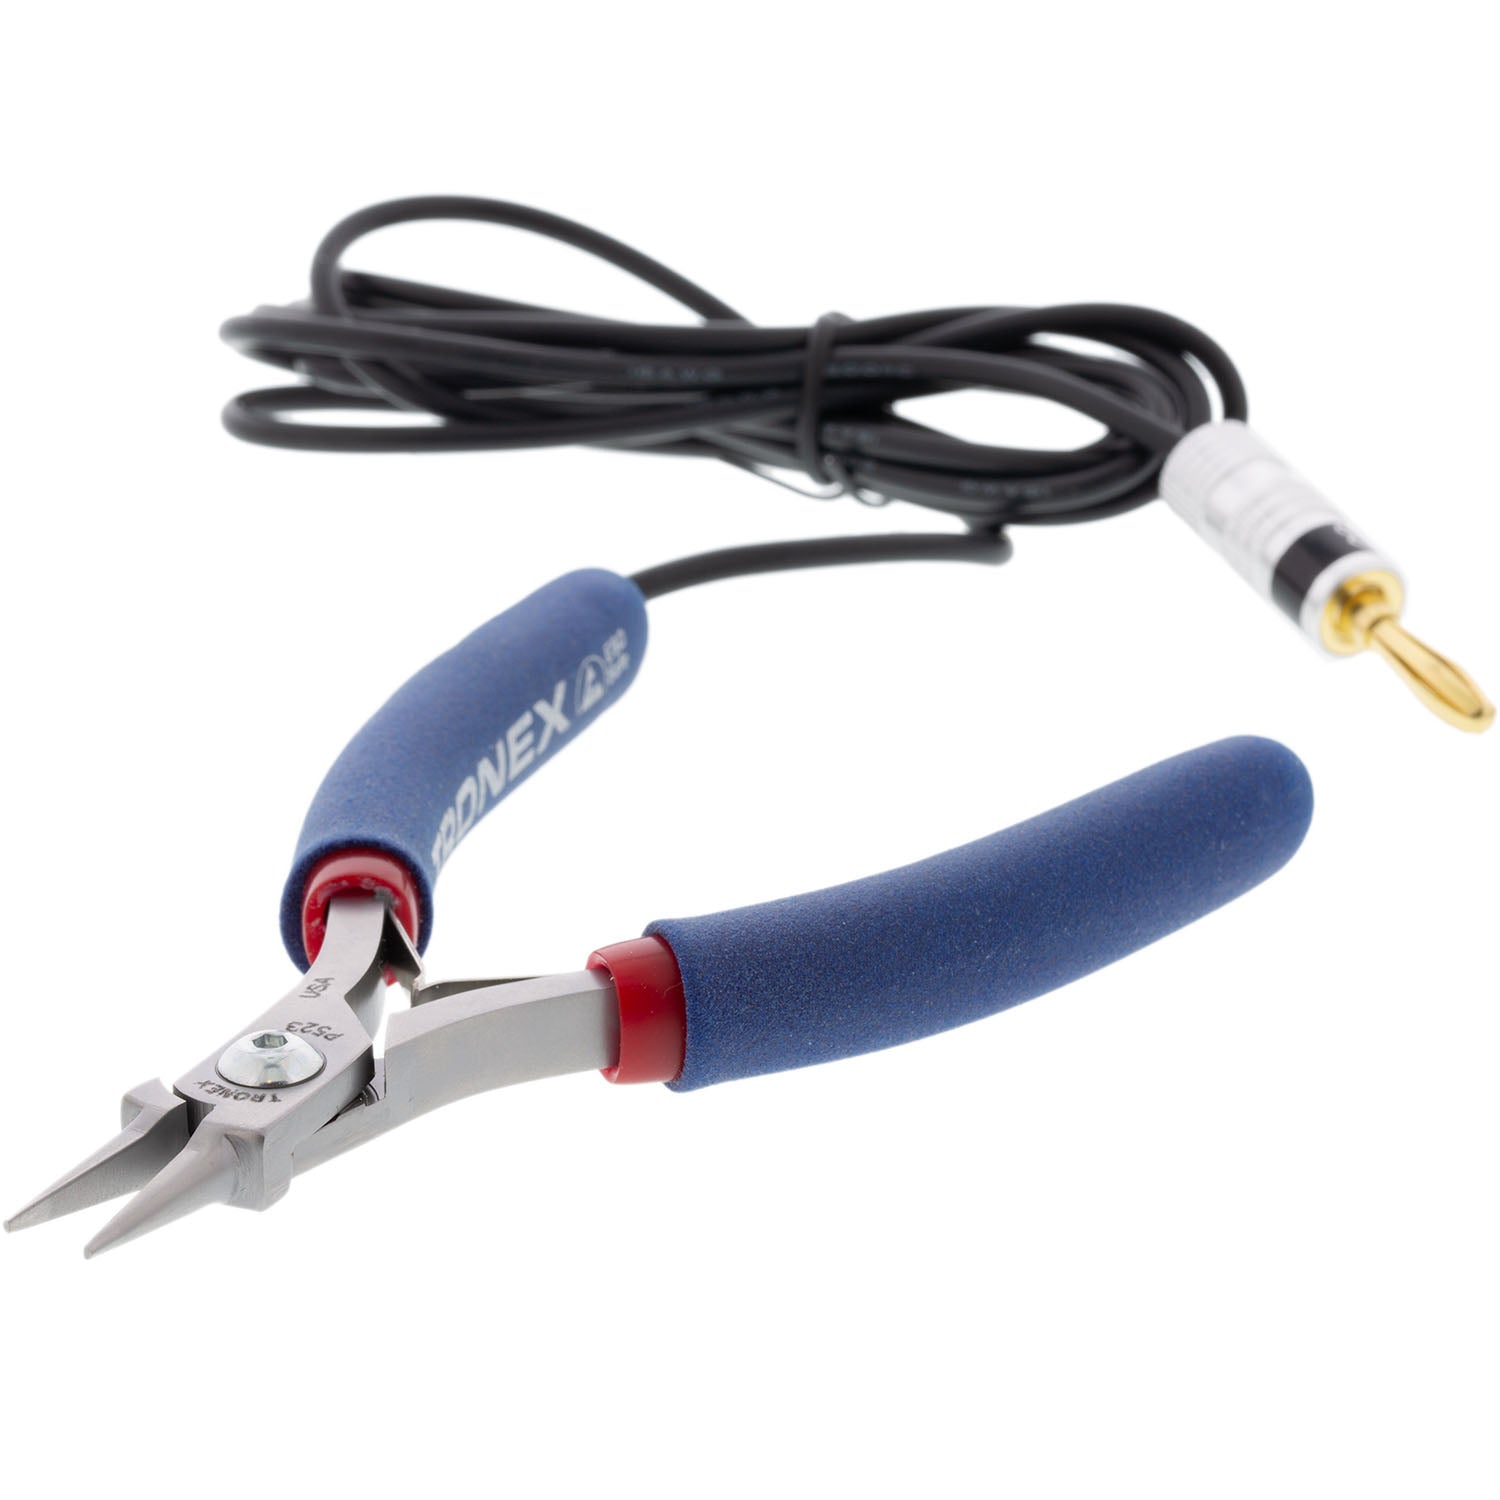 Grounded Needle Nose Pliers for Permanent Jewelry